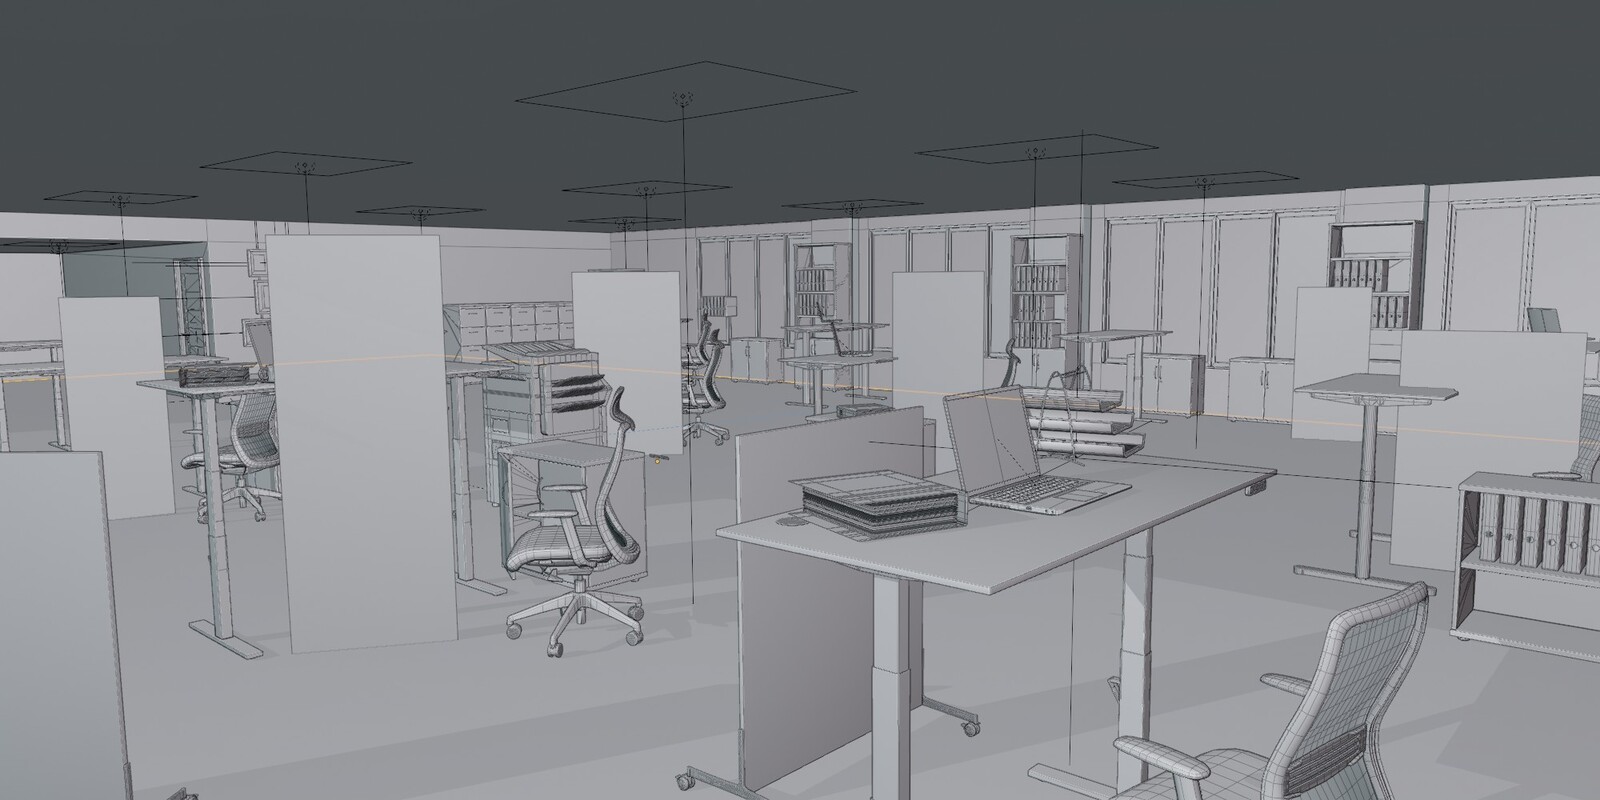 Large Corporate office wireframe